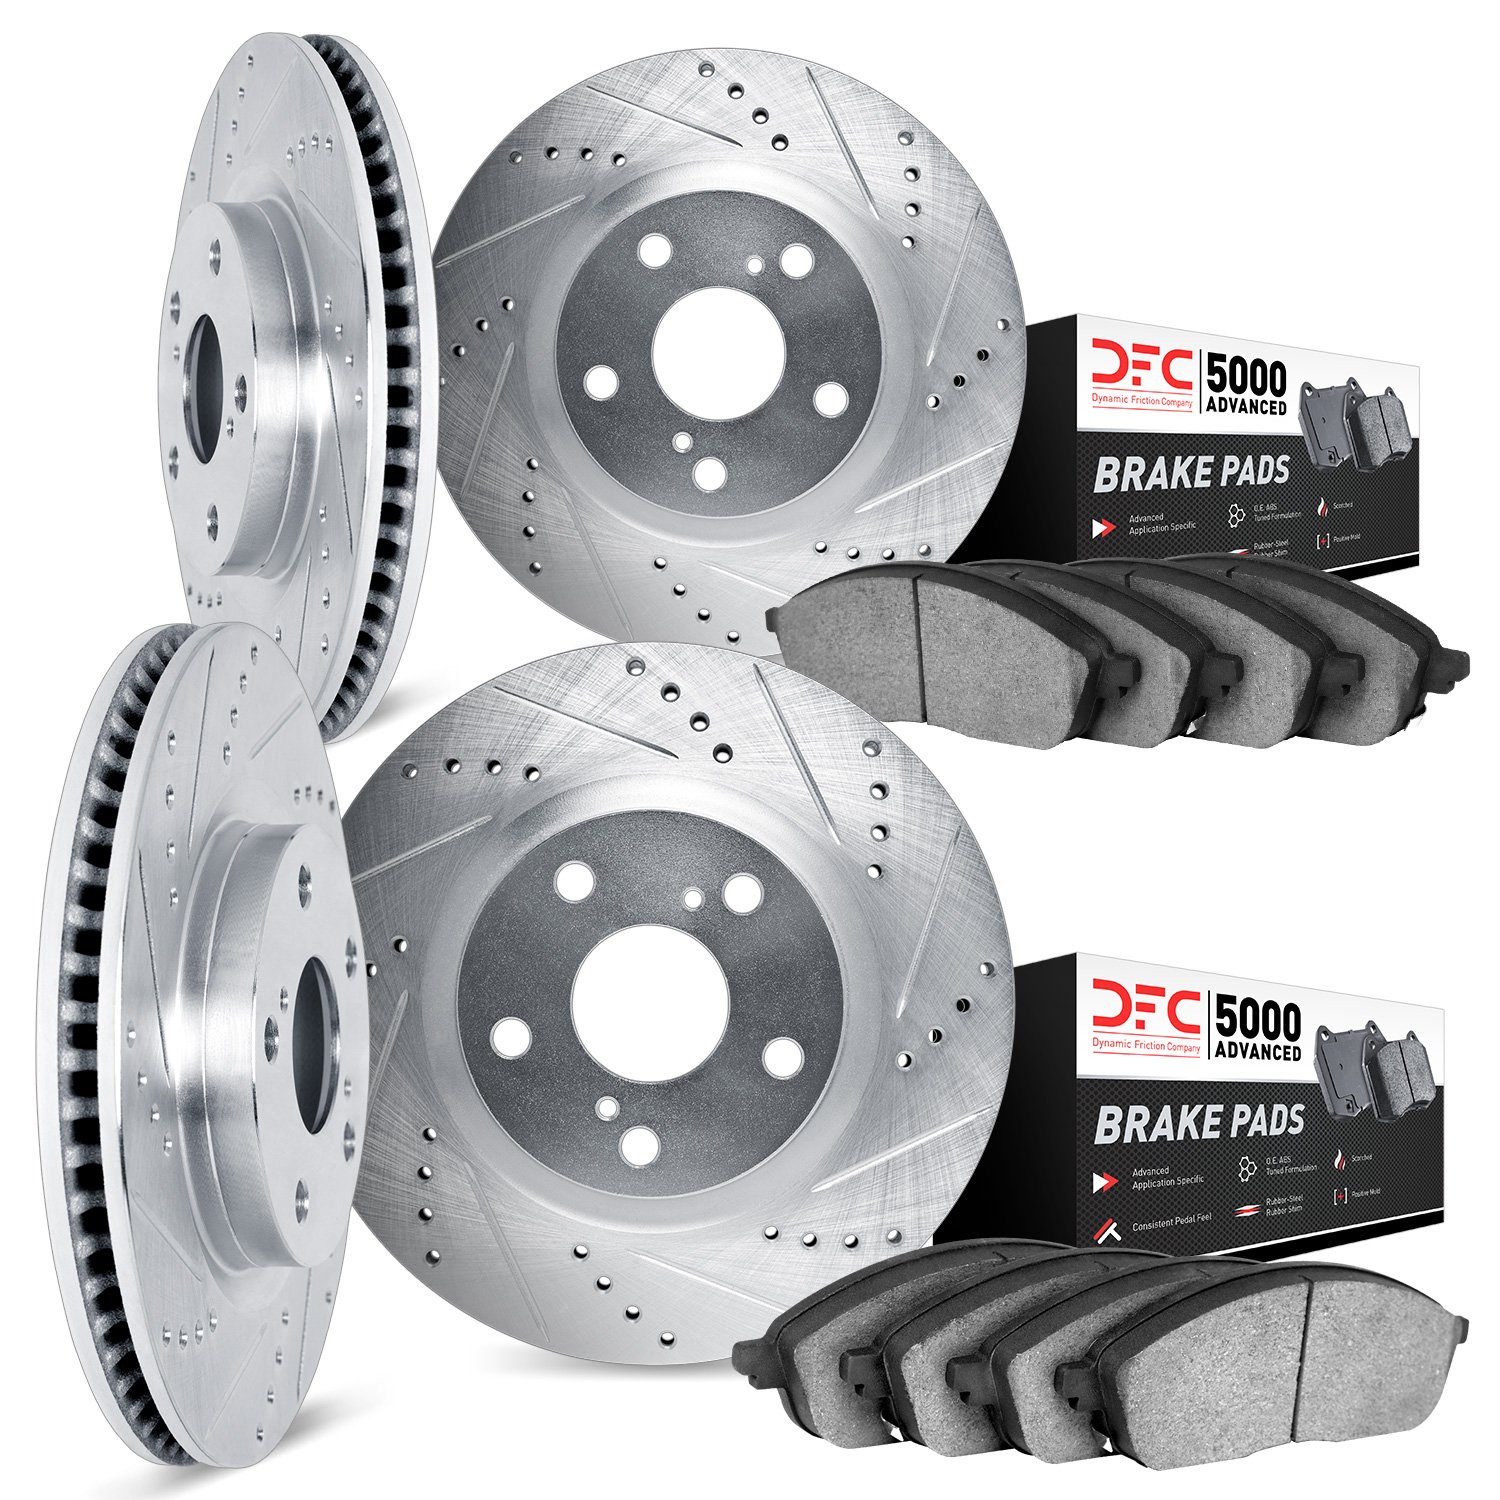 7504-40237 Drilled/Slotted Brake Rotors w/5000 Advanced Brake Pads Kit [Silver], 2006-2018 Mopar, Position: Front and Rear